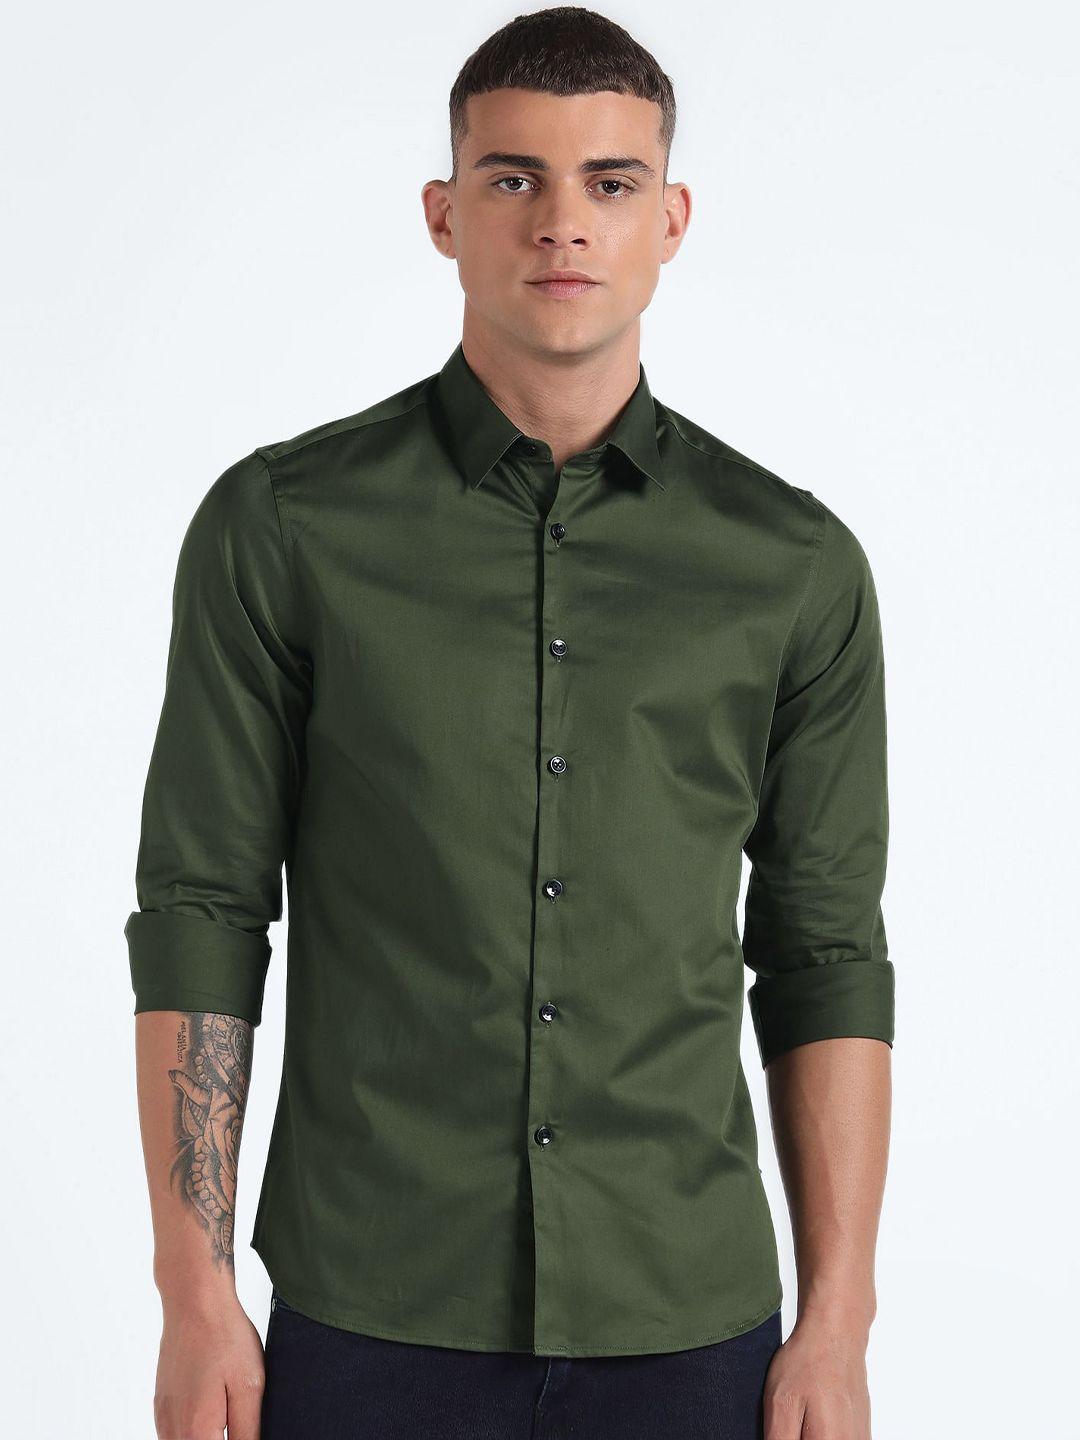 flying machine slim fit spread collar cotton casual shirt